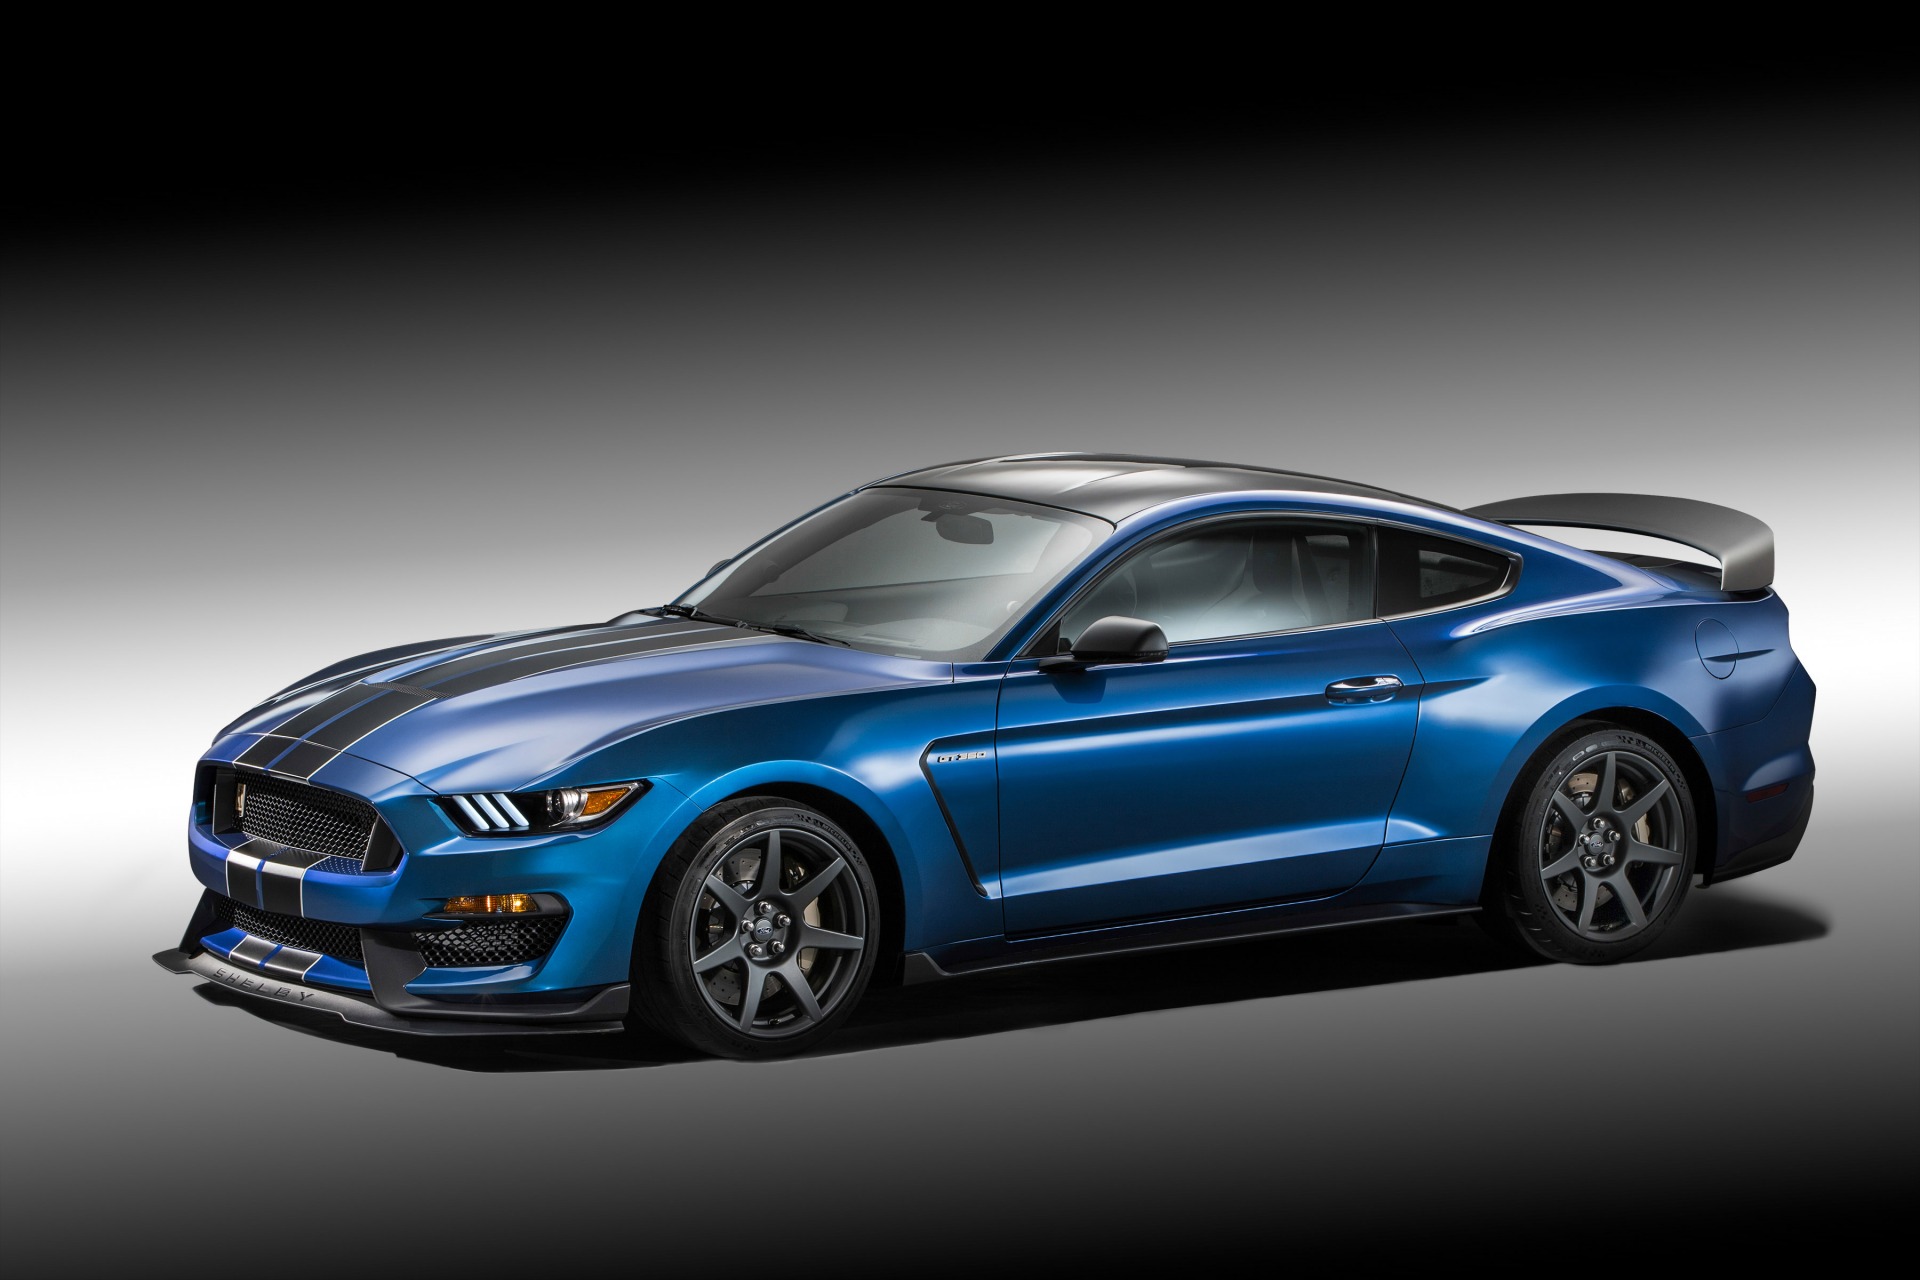 2016 Shelby GT350R | Ford Mustang Photo Gallery | Shnack.com